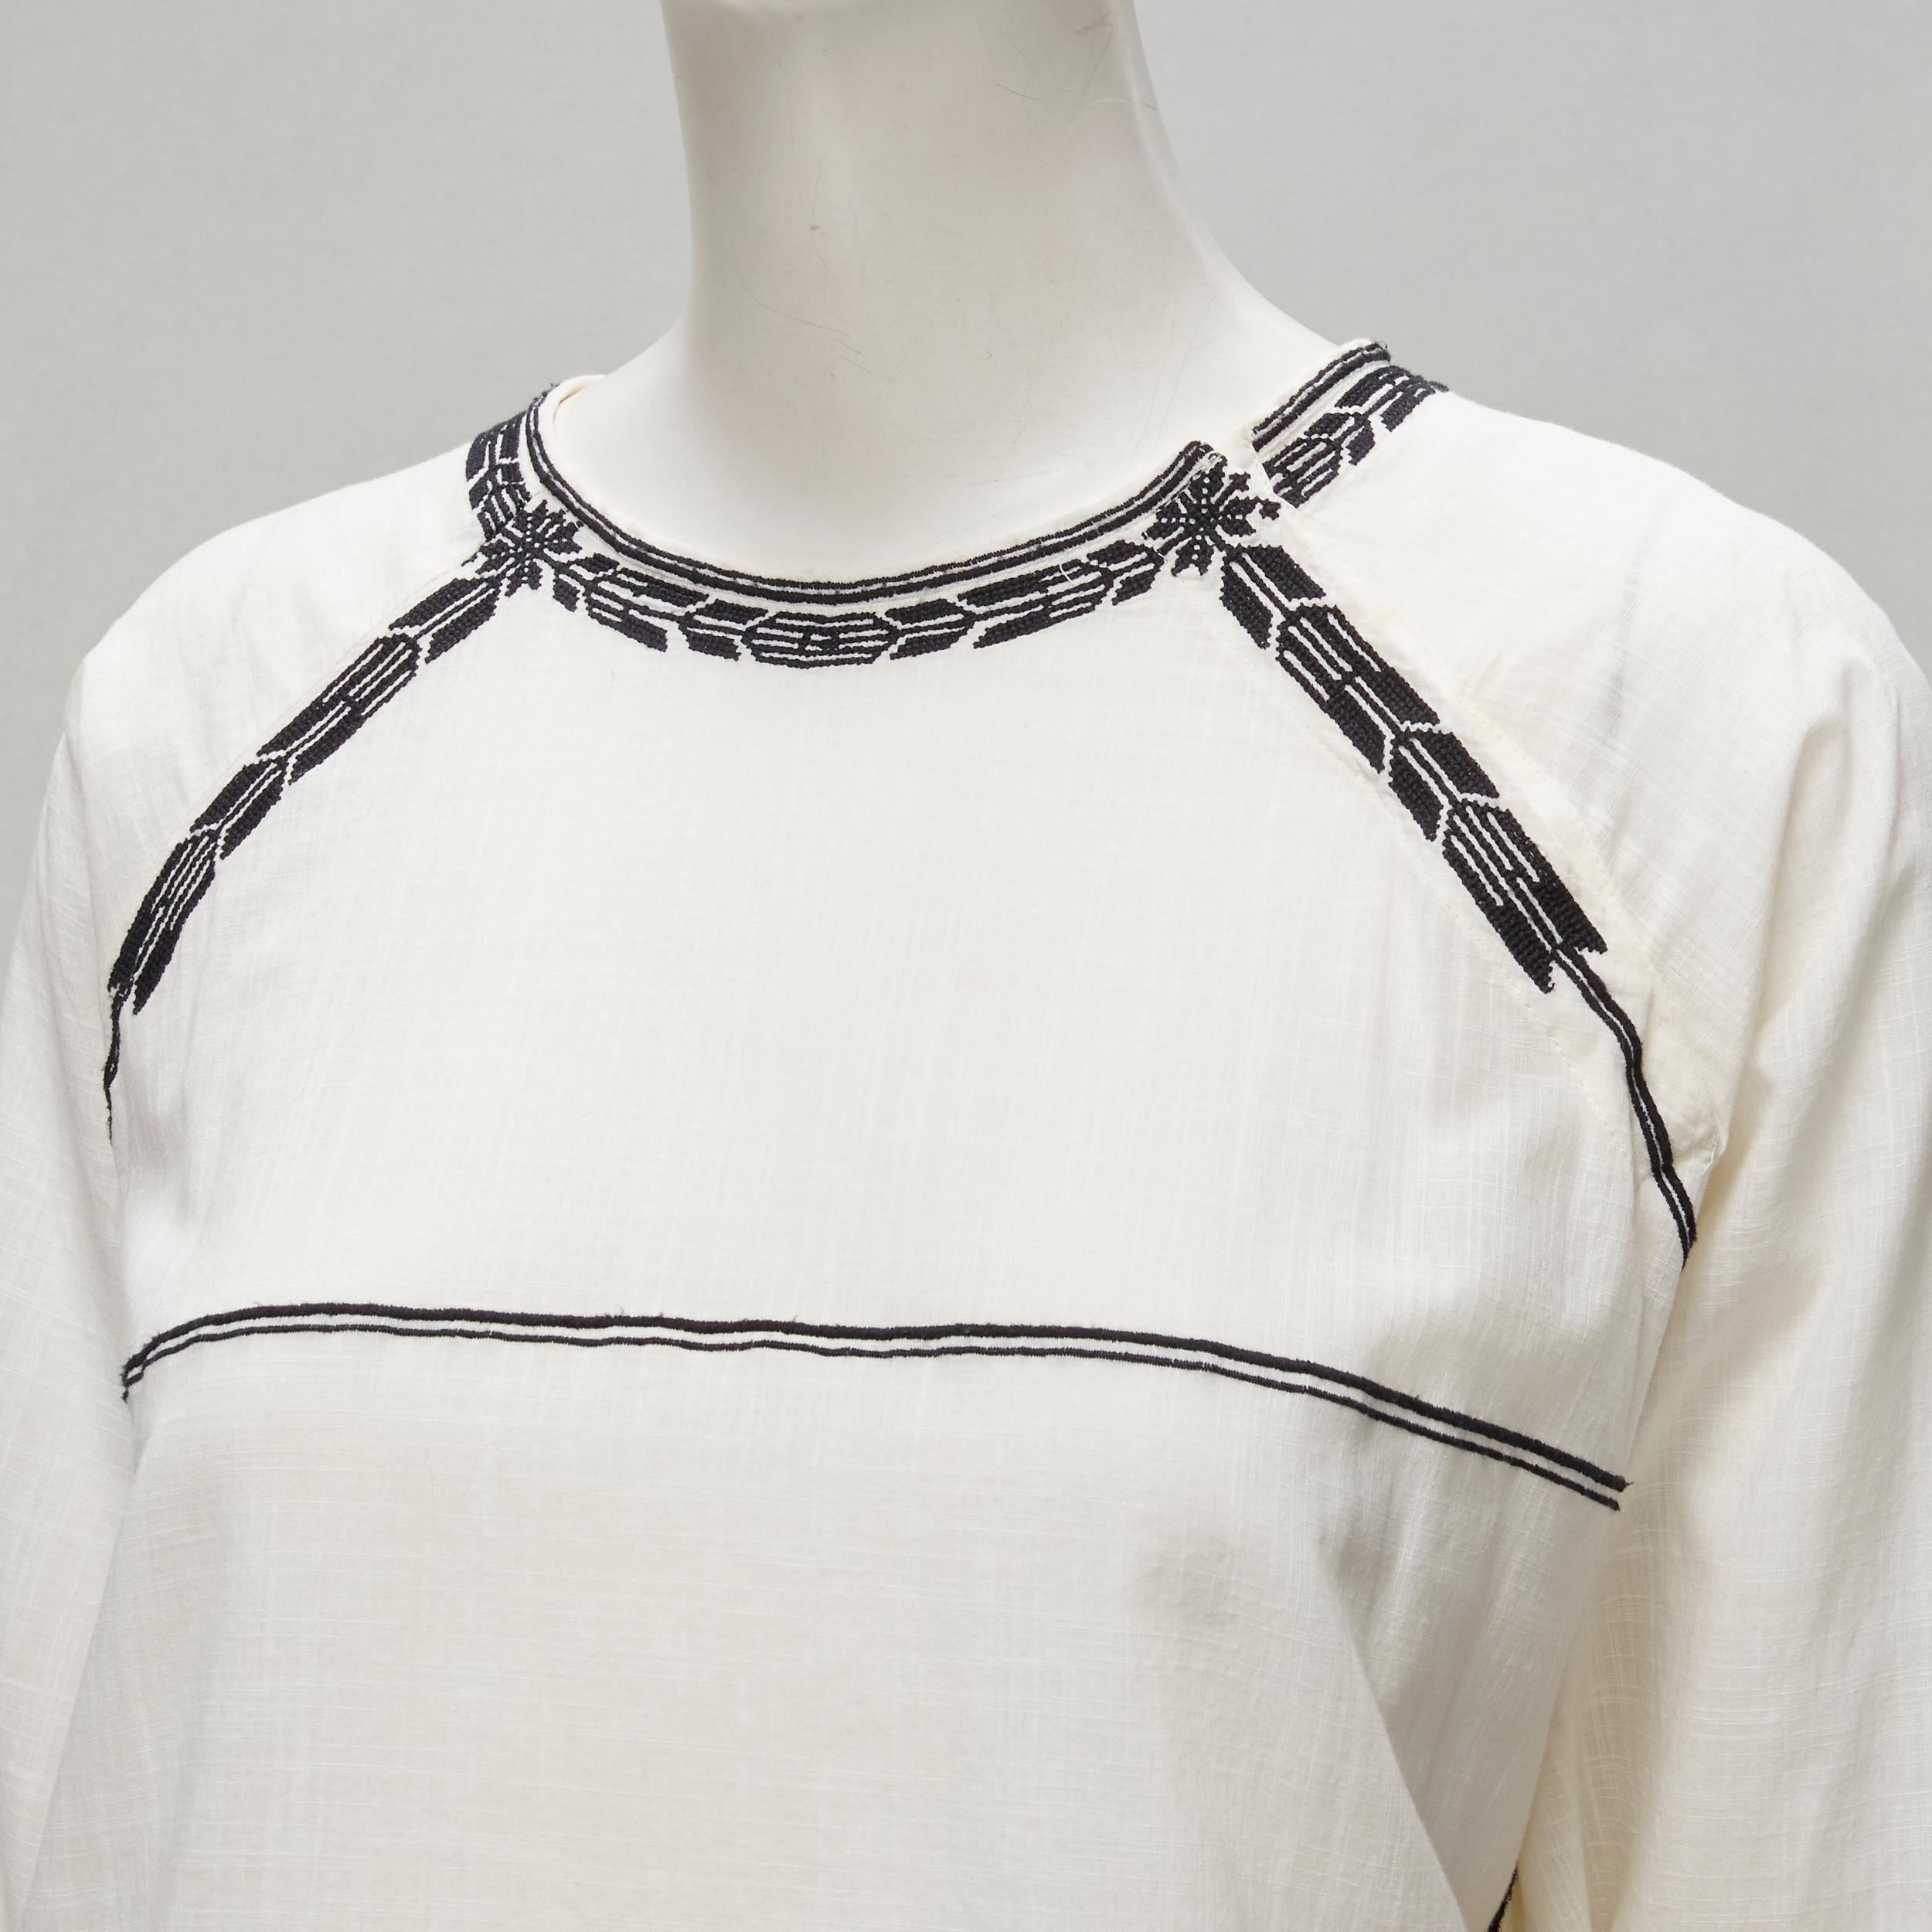 ISABEL MARANT ETOILE black embroidery cream cotton pocketed boho top FR36 S
Reference: CRTI/A00757
Brand: Isabel Marant Etoile
Designer: Isabel Marant
Material: Cotton
Color: Cream
Pattern: Solid
Closure: Snap Buttons
Extra Details: Side snap